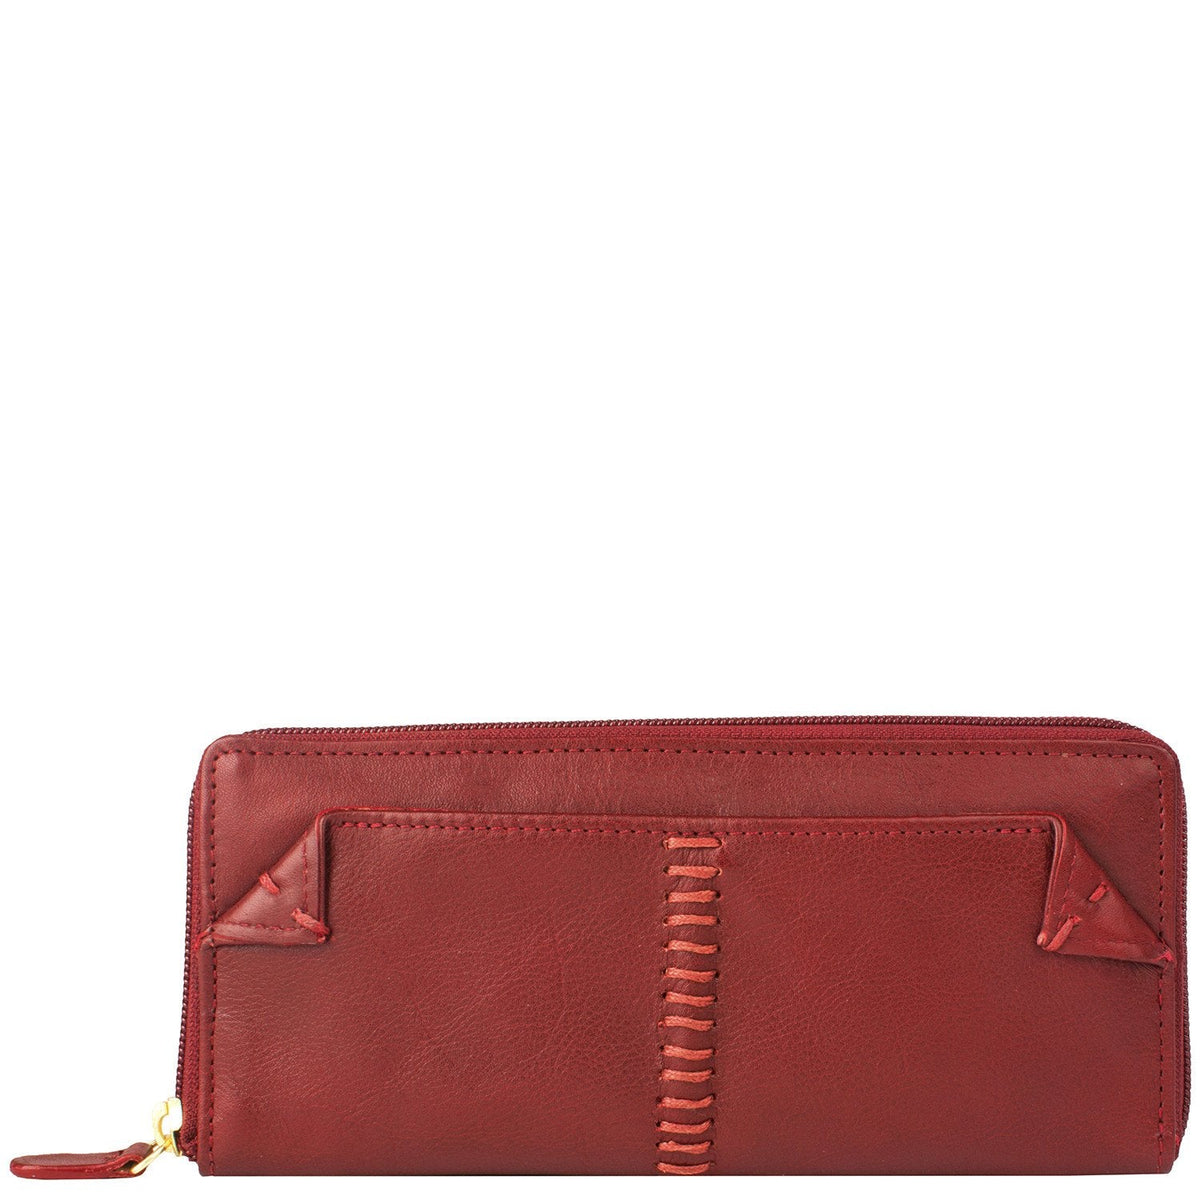 Bags &amp; Luggage - Women&#39;s Bags - Wallets Stitch Zip Around Leather Wallet